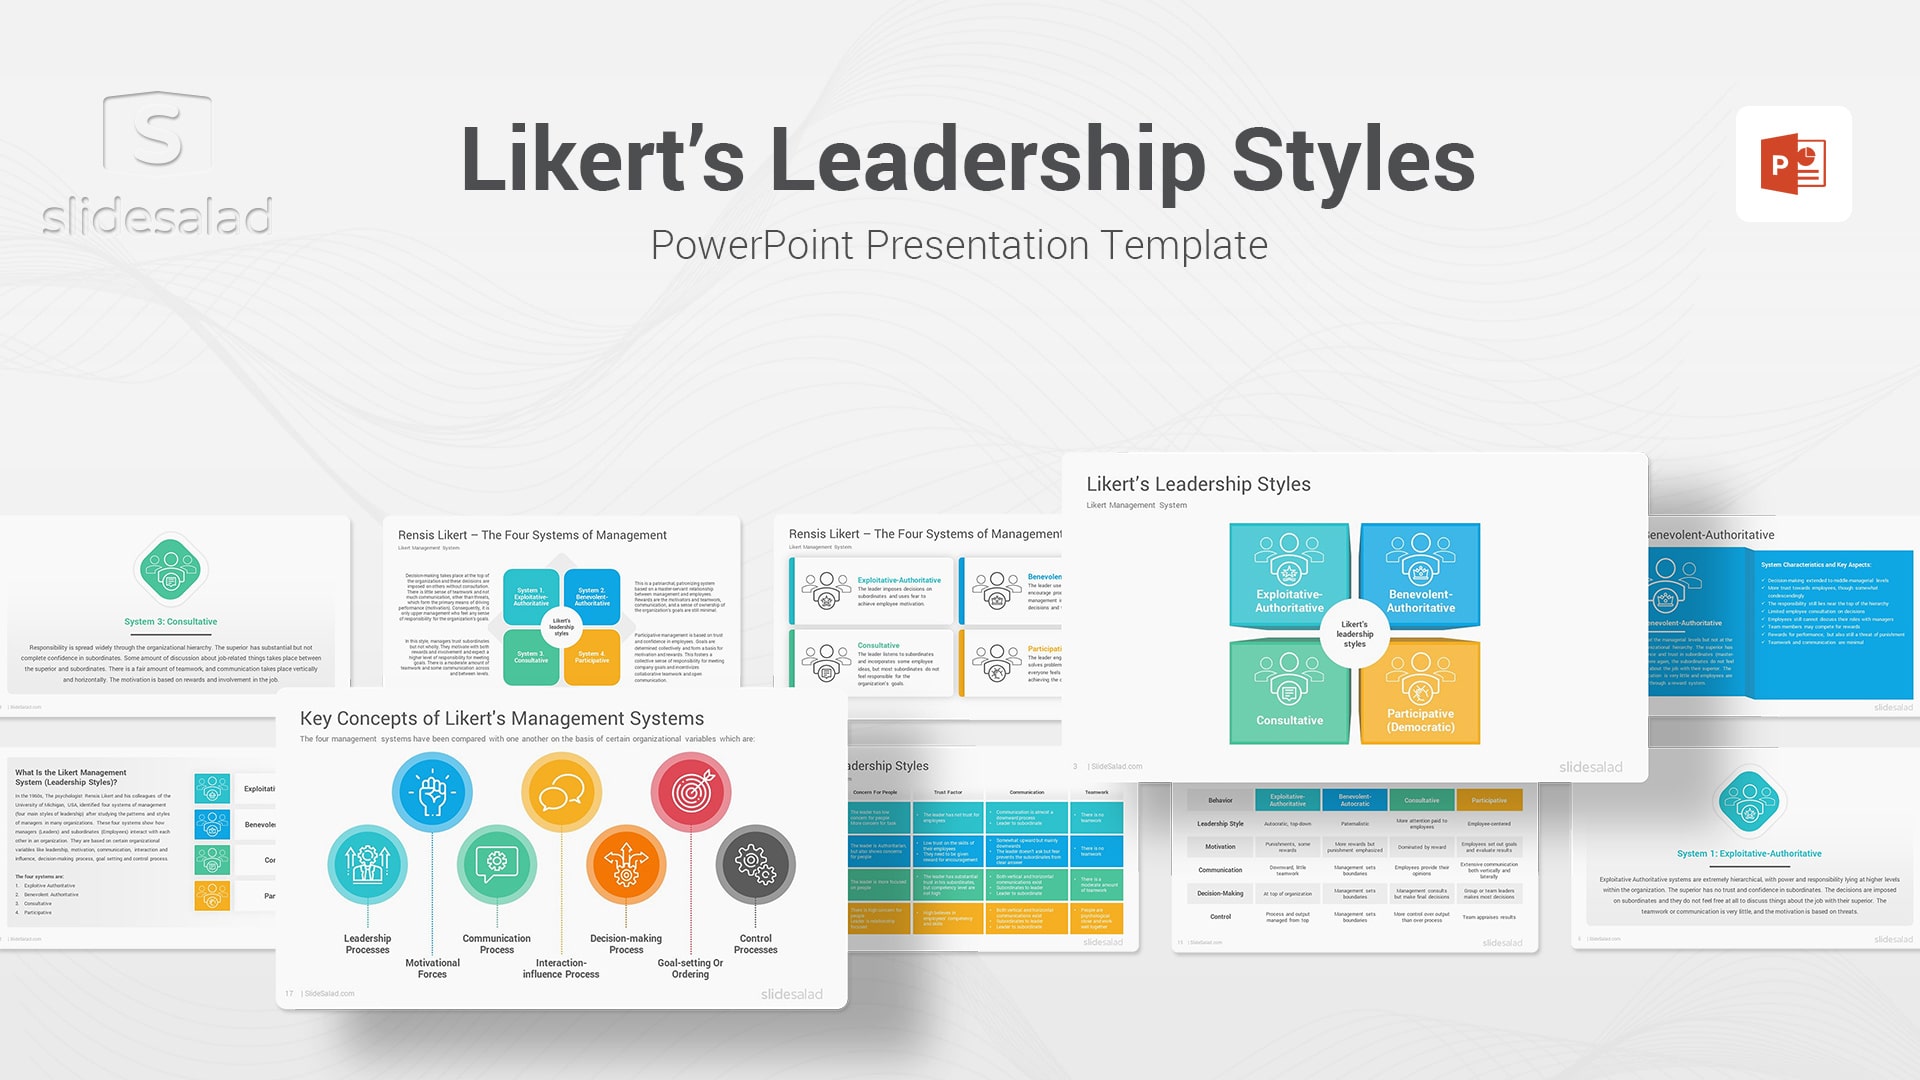 Likert’s Leadership Styles Model PowerPoint Template - Recommended Leadership Templates for PowerPoint Presentations